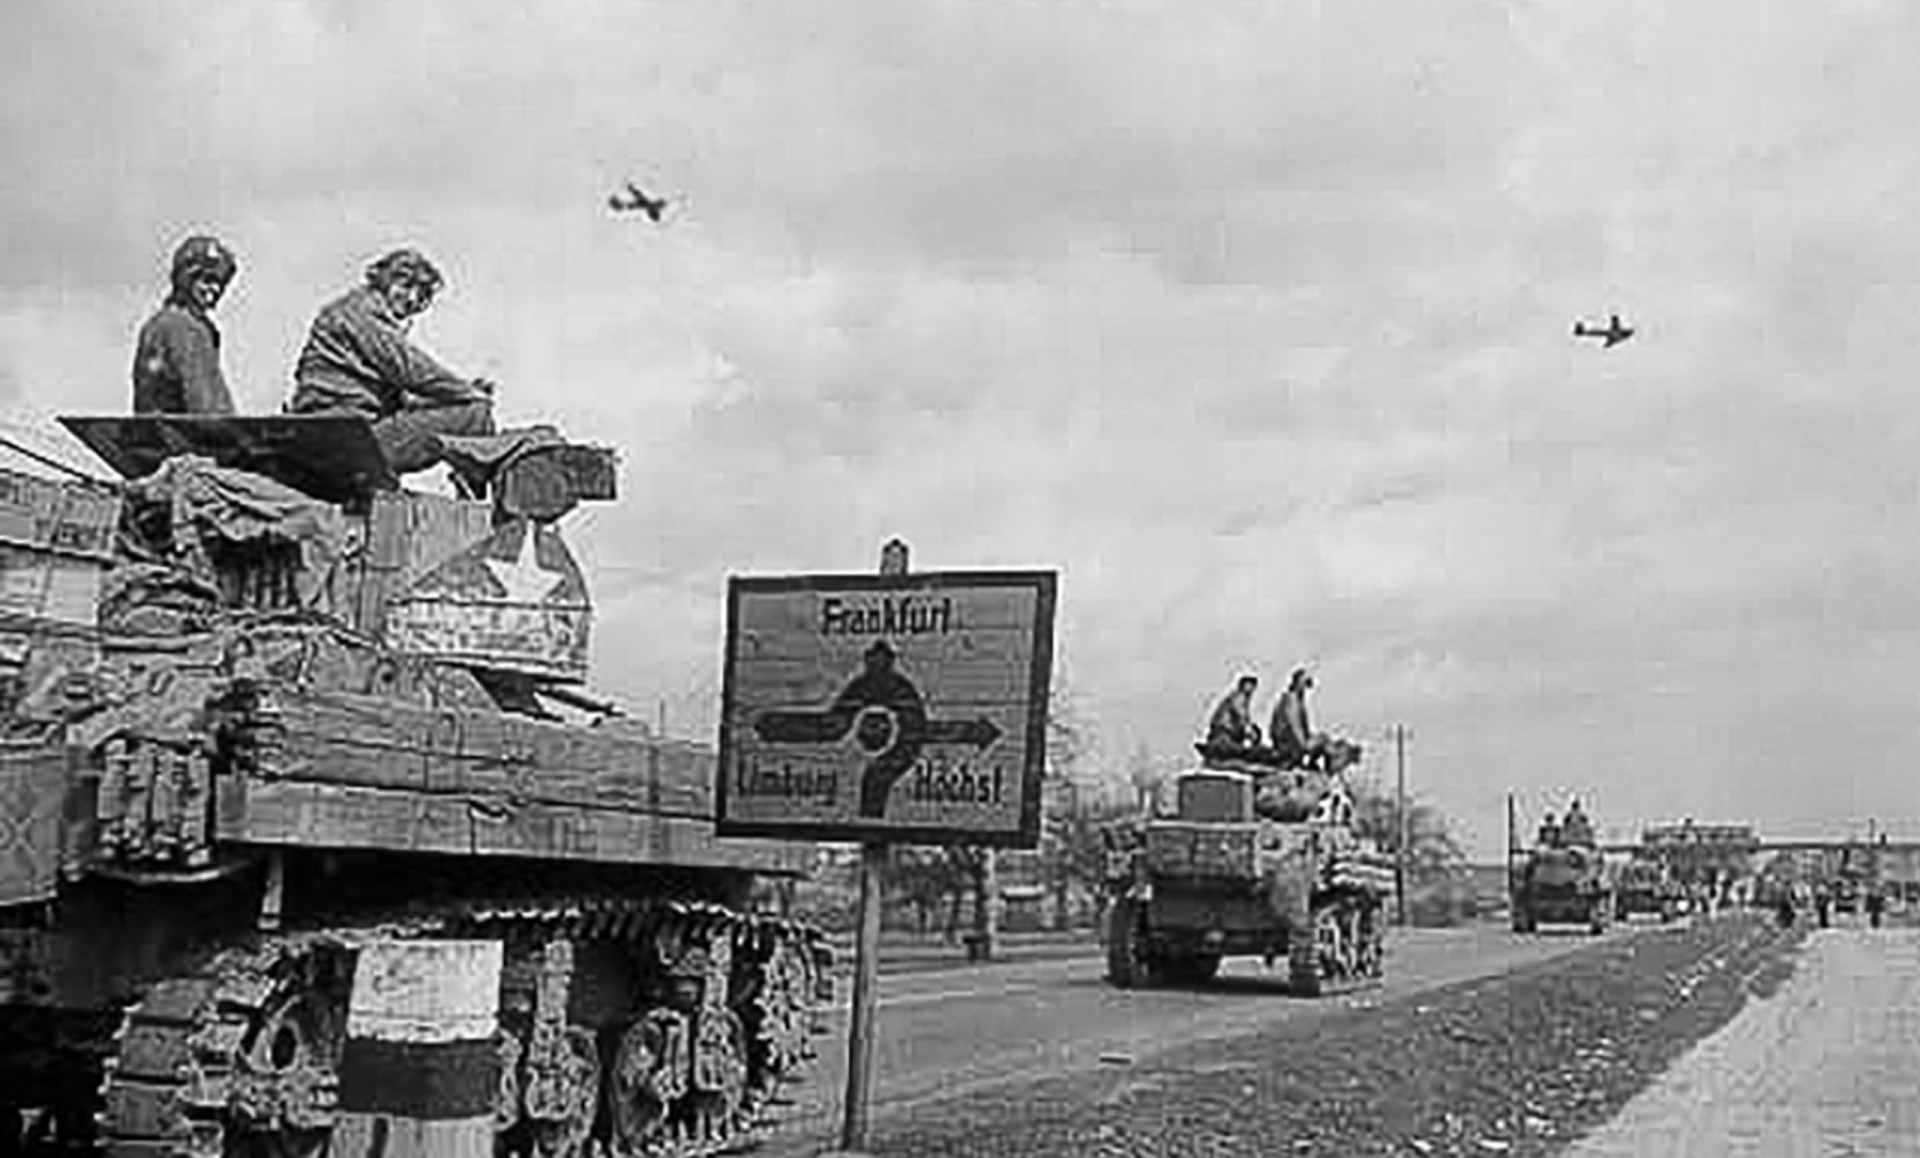 <p>Ironically, the Autobahn, built in part to carry Hitler's conquering armies to glory, ended up facilitating his conquerors. Here, tanks of the 11th Armored Division, Third US Army, advance along the motorway near Frankfurt on March 31, 1945.</p><p>You may also like:<a href="https://www.starsinsider.com/n/345376?utm_source=msn.com&utm_medium=display&utm_campaign=referral_description&utm_content=697904en-us"> Deadly diseases you thought were gone...but aren't</a></p>